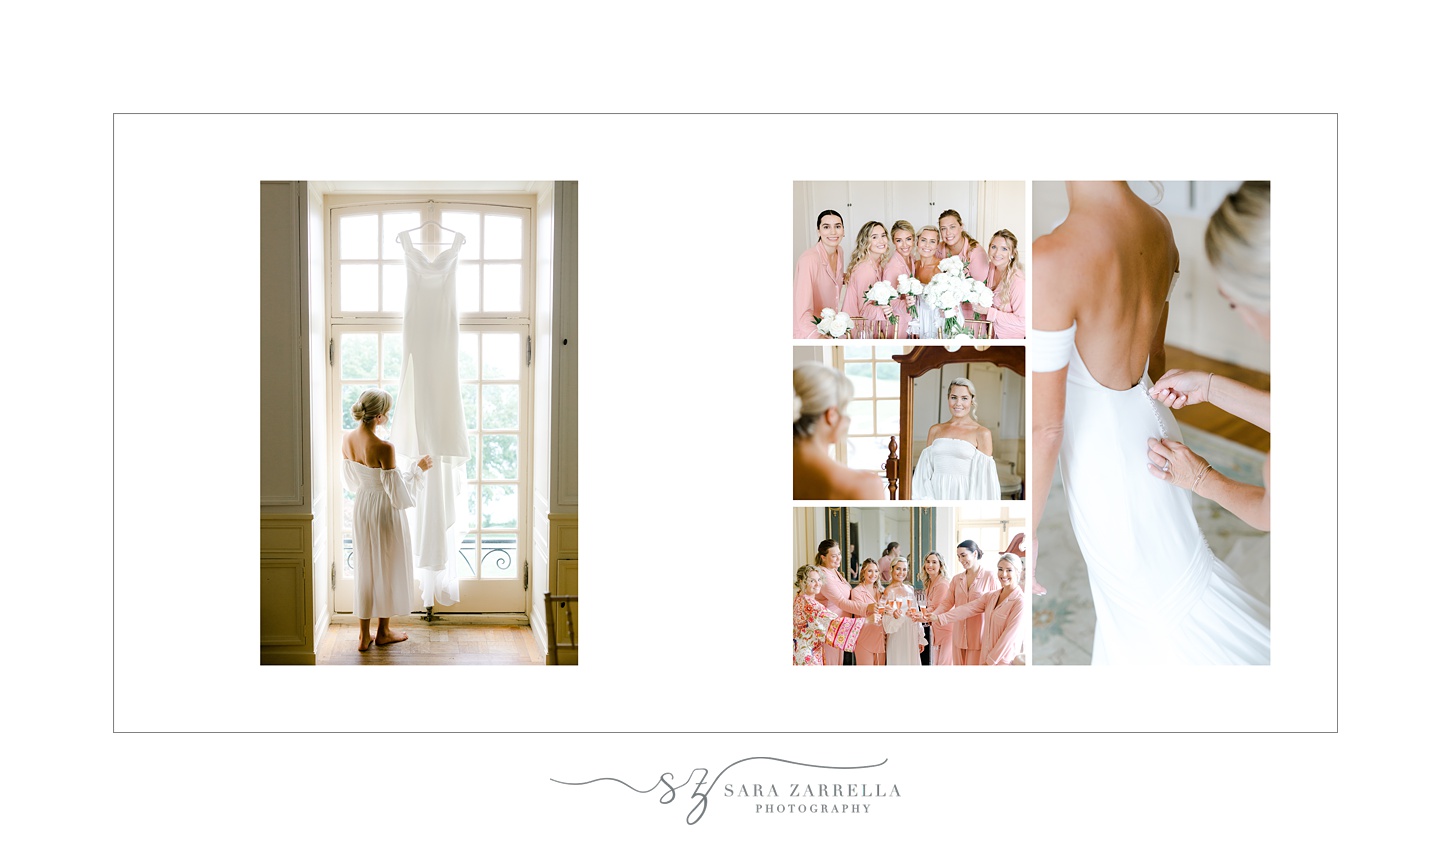 wedding album featuring French chateau inspired wedding day at Glen Manor House